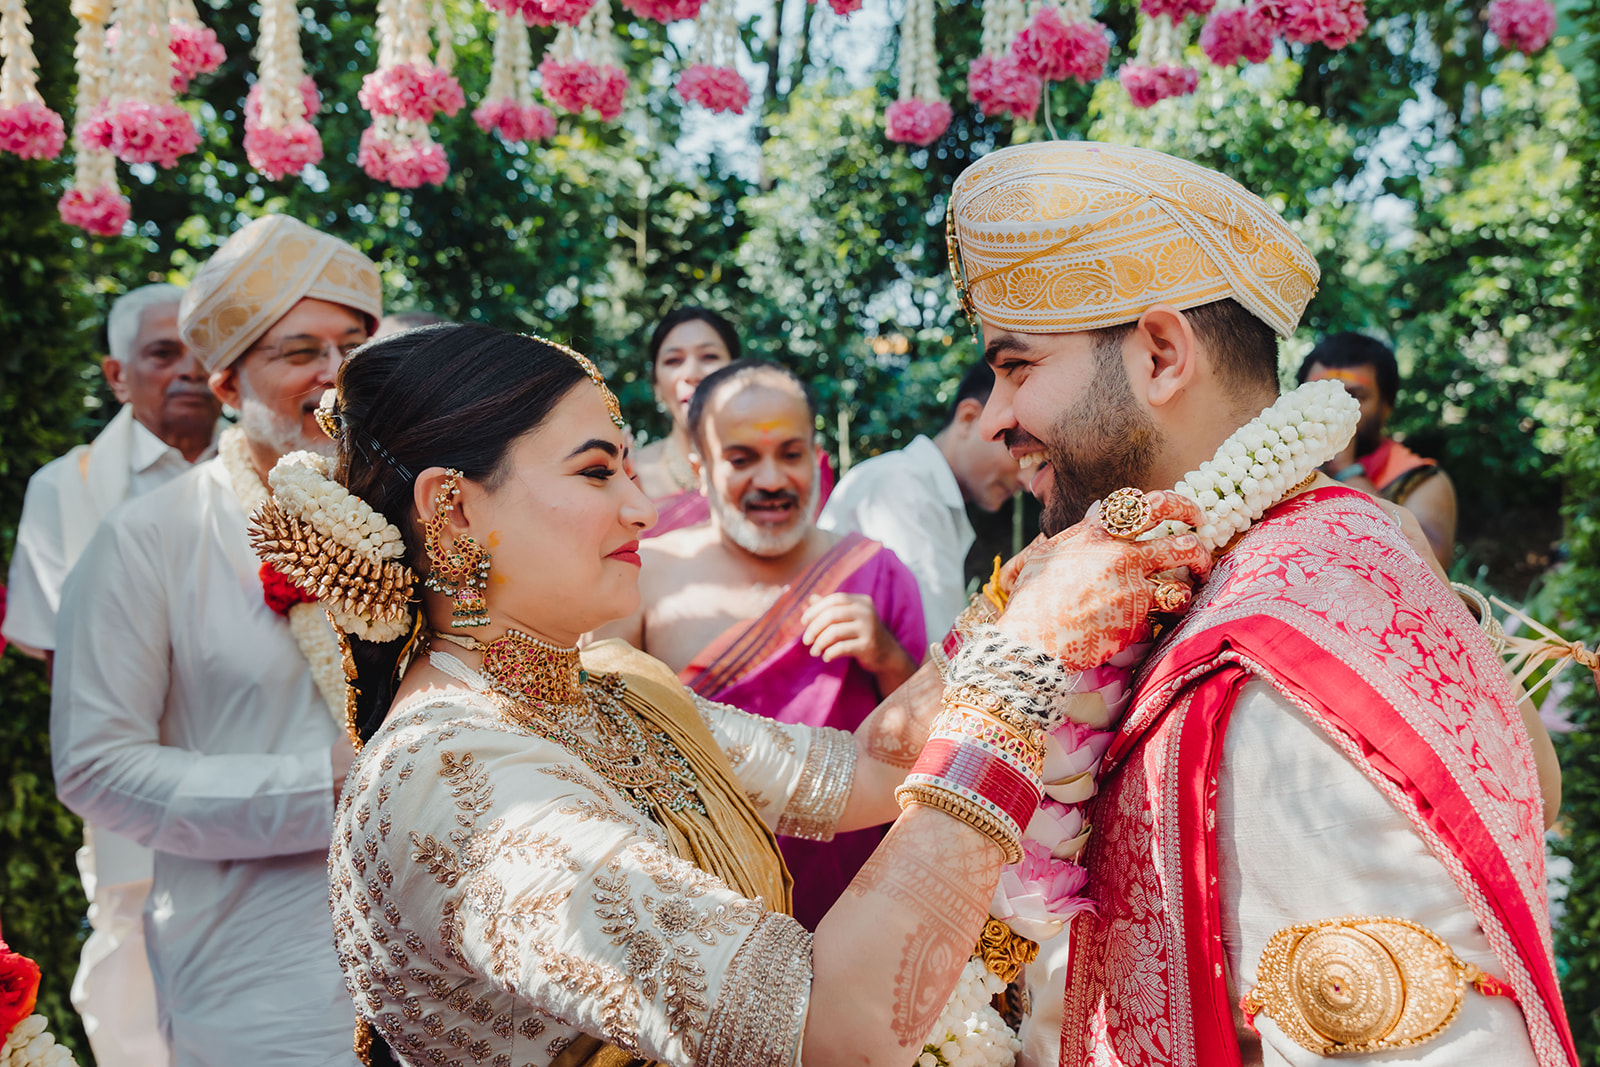 Ceremonial union: Capturing the symbolic exchange of garlands between the bride and groom.